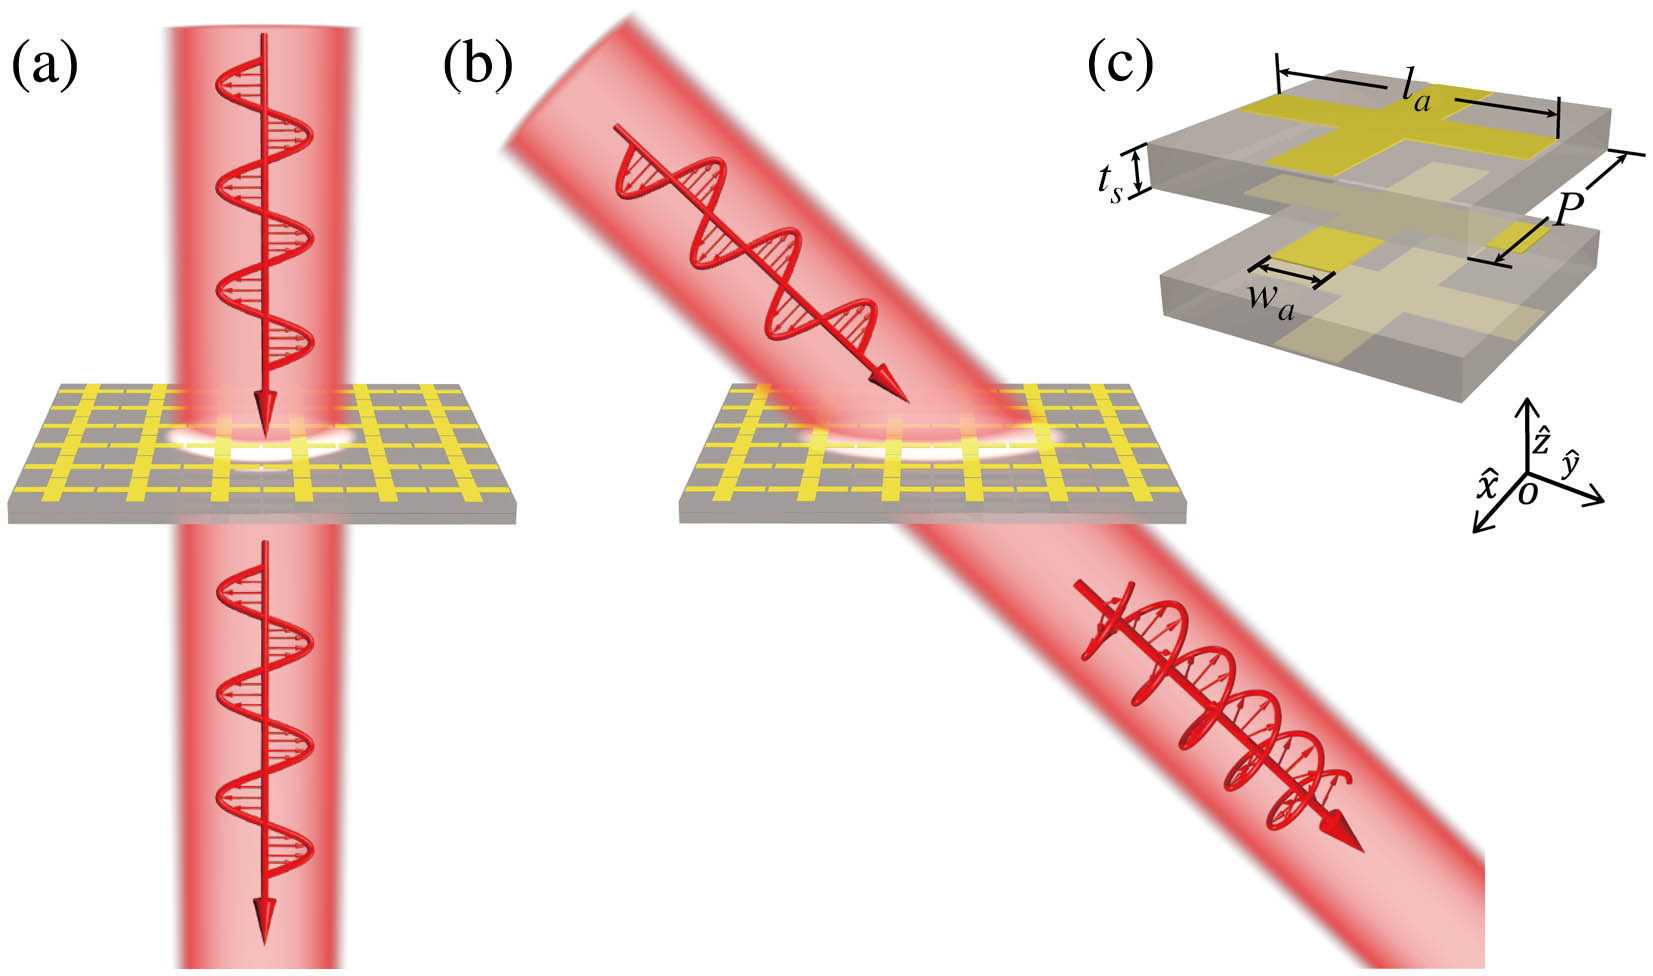 Schematic of transmissive angle-multiplexed meta-polarizer based on multilayered isotropic metasurfaces under (a) normal and (b) oblique incidence. (c) Schematic of meta-atom design. Geometrical parameters of meta-atom: la = 7.2 mm, wa = 1.8 mm, unit cell period P = 7.5 mm, thickness of metallic film t = 0.035 mm, and thickness of dielectric layer ts = 1 mm.